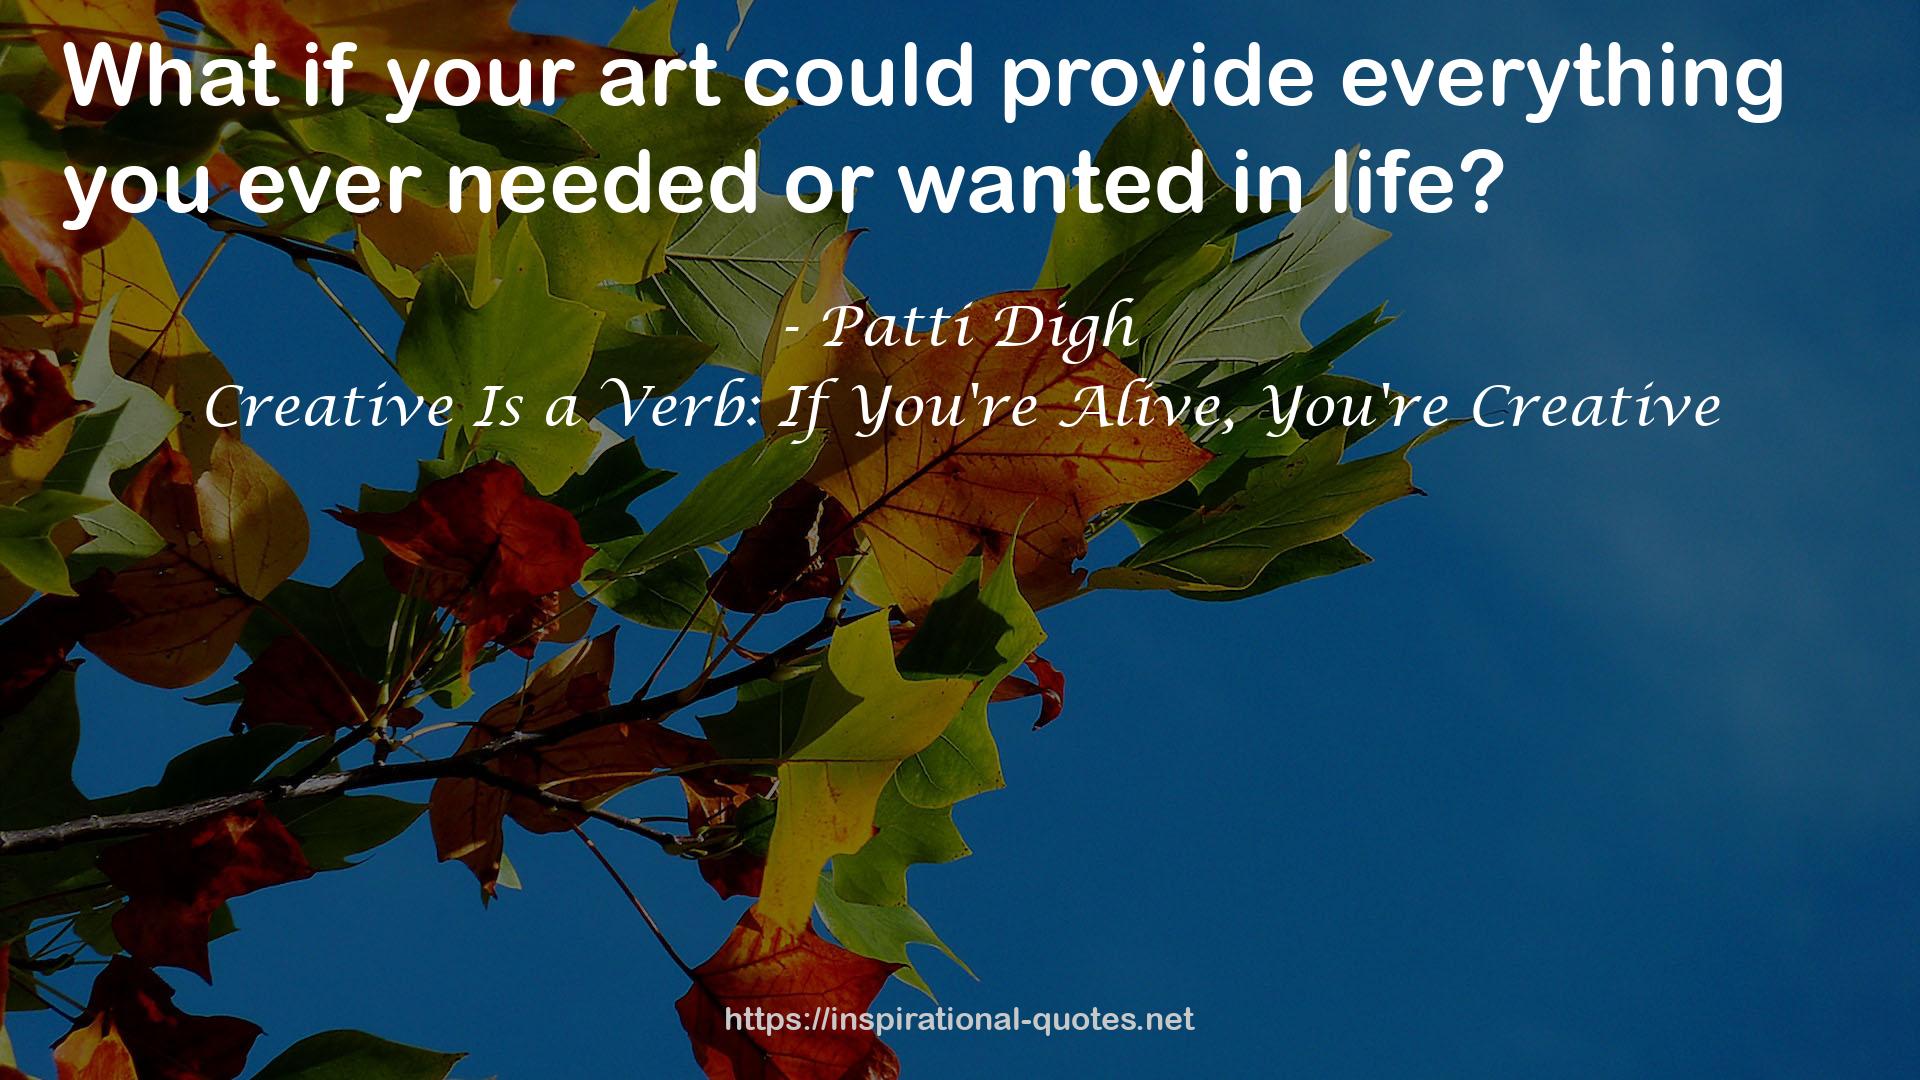 Creative Is a Verb: If You're Alive, You're Creative QUOTES